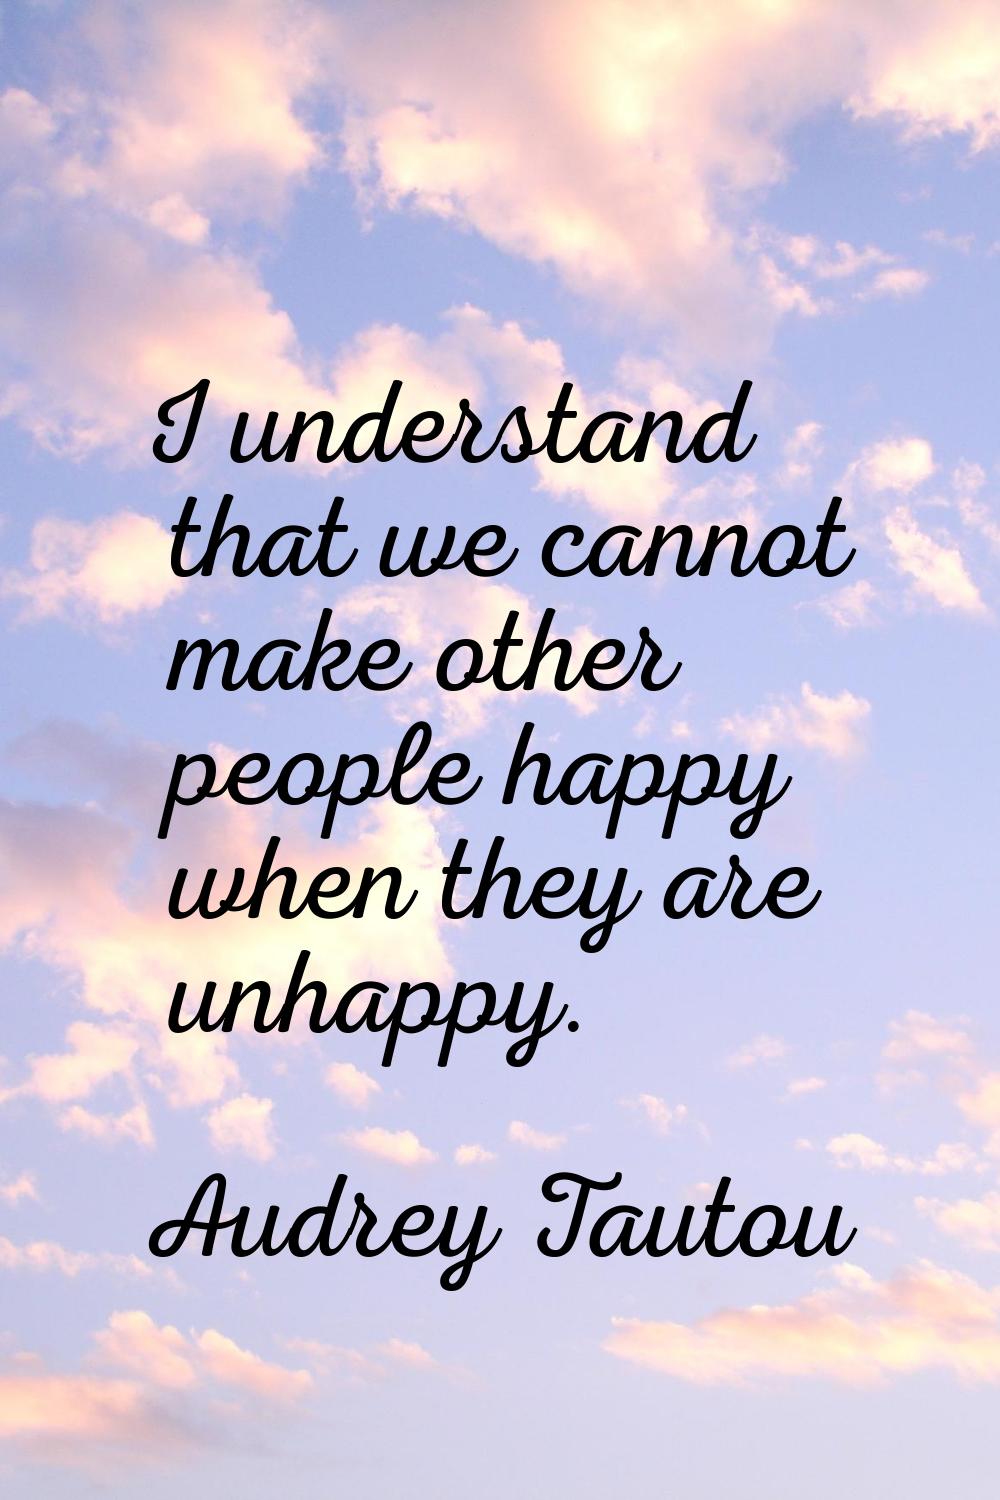 I understand that we cannot make other people happy when they are unhappy.